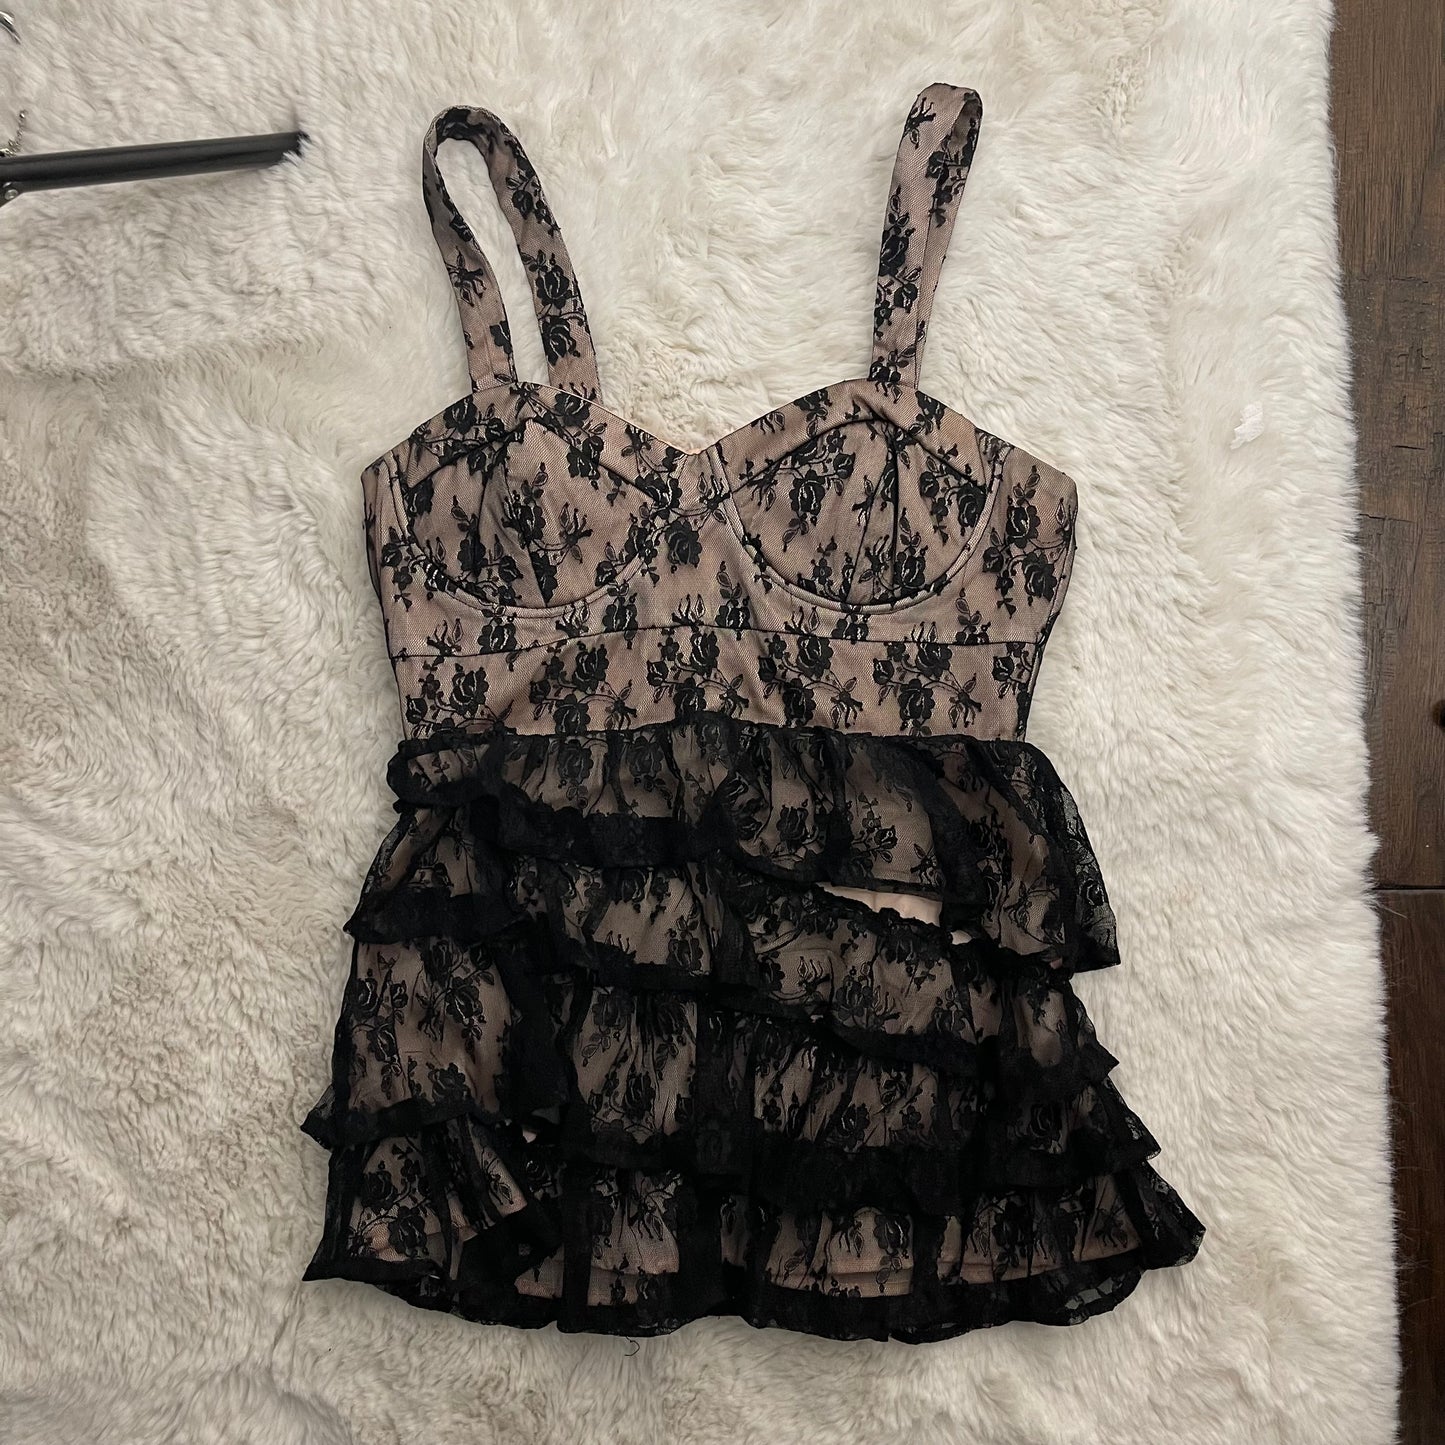 Vintage Layered Lace Bustier Top